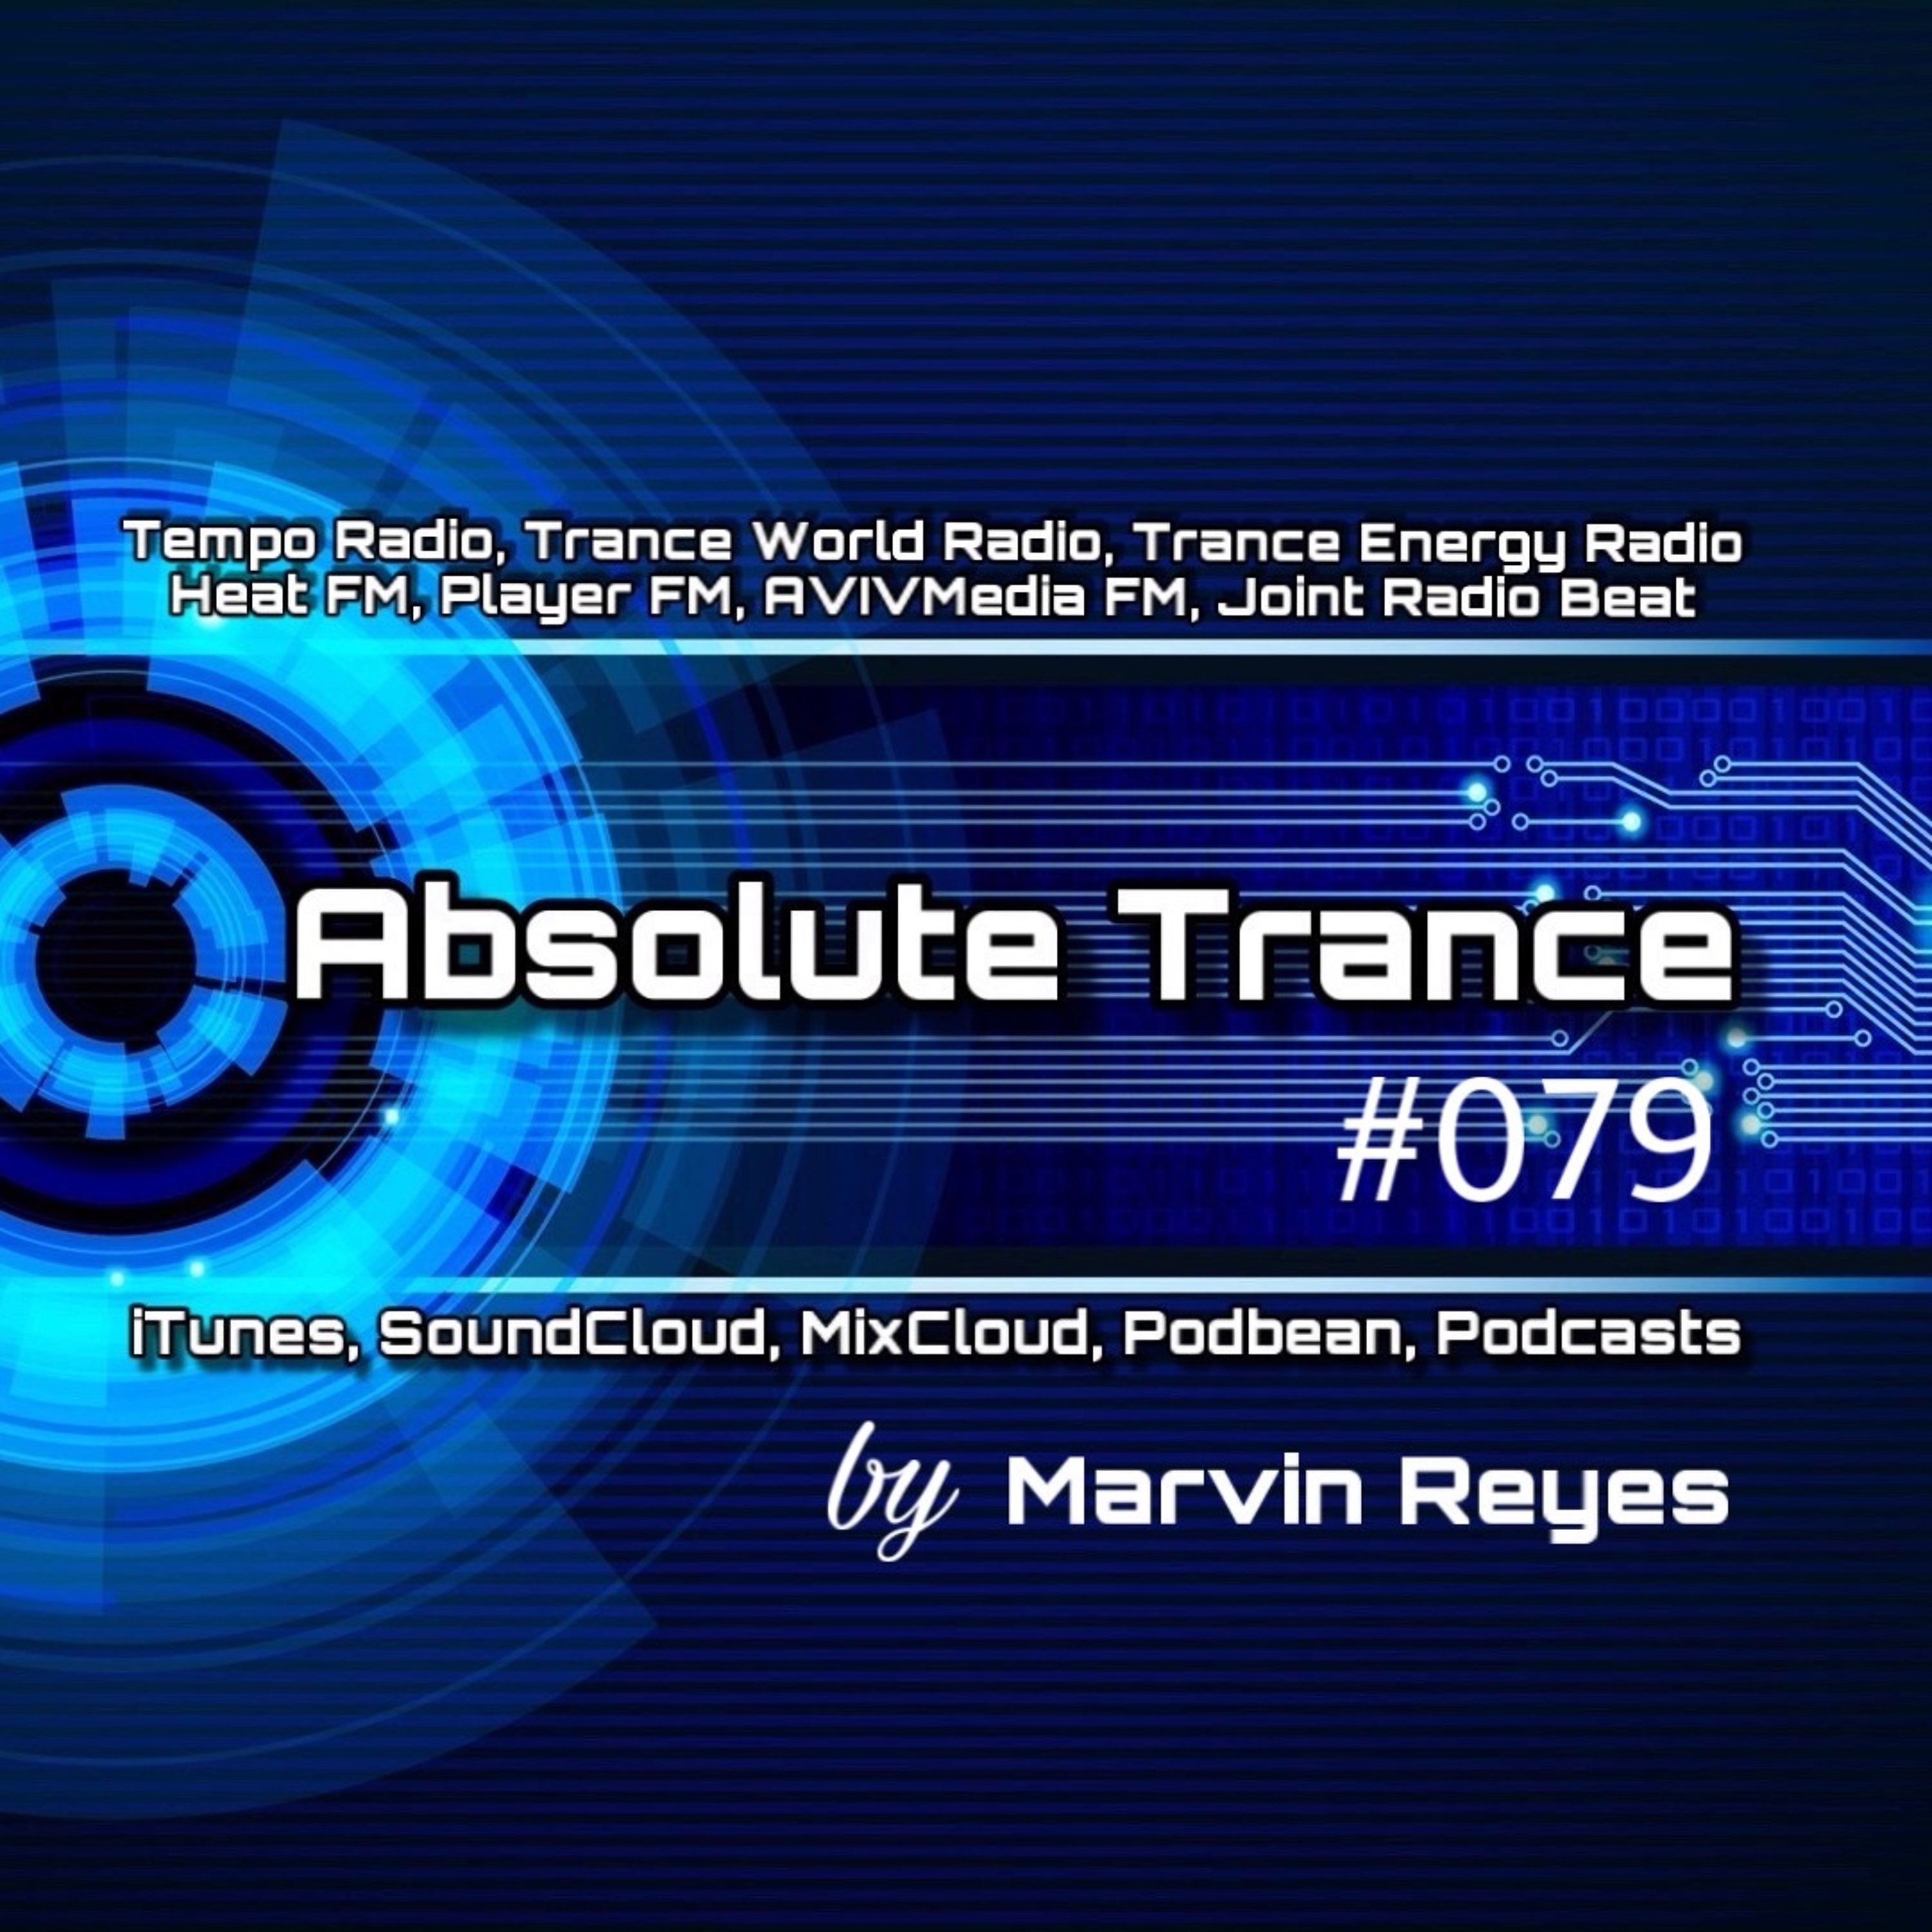 Absolute Trance #079